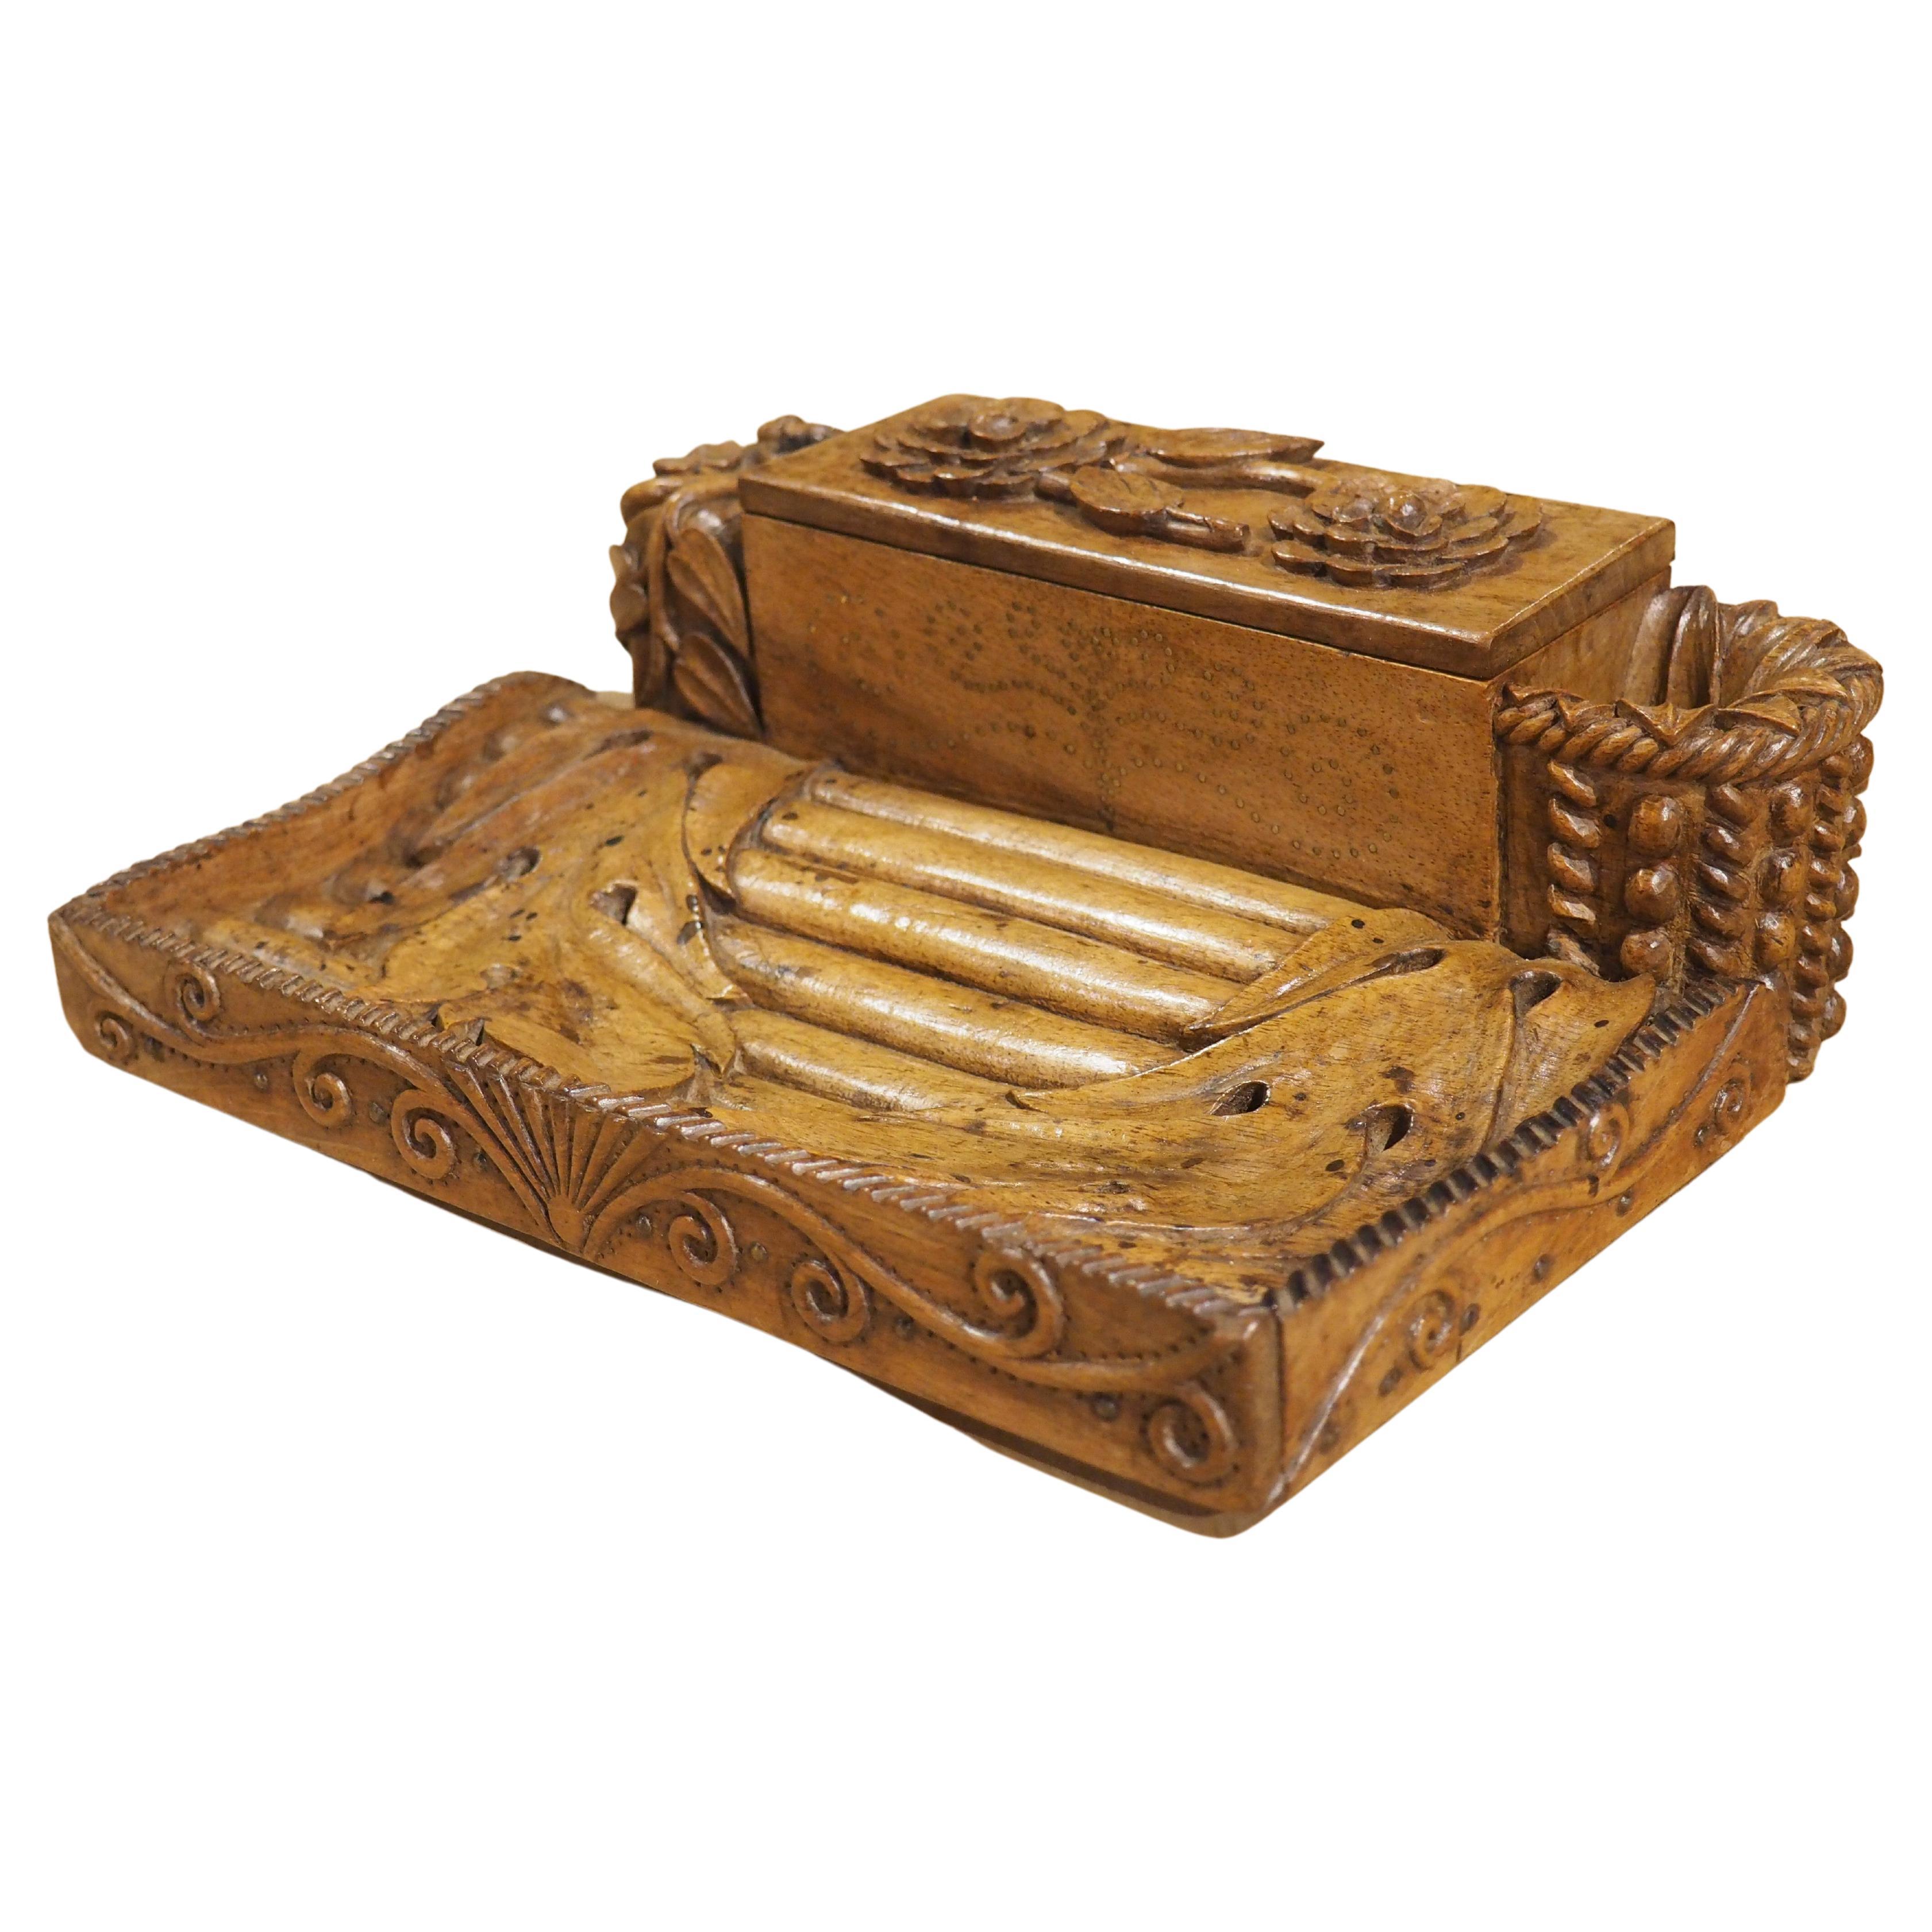 Unusual Carved Walnut Wood Inkwell from France, Circa 1880